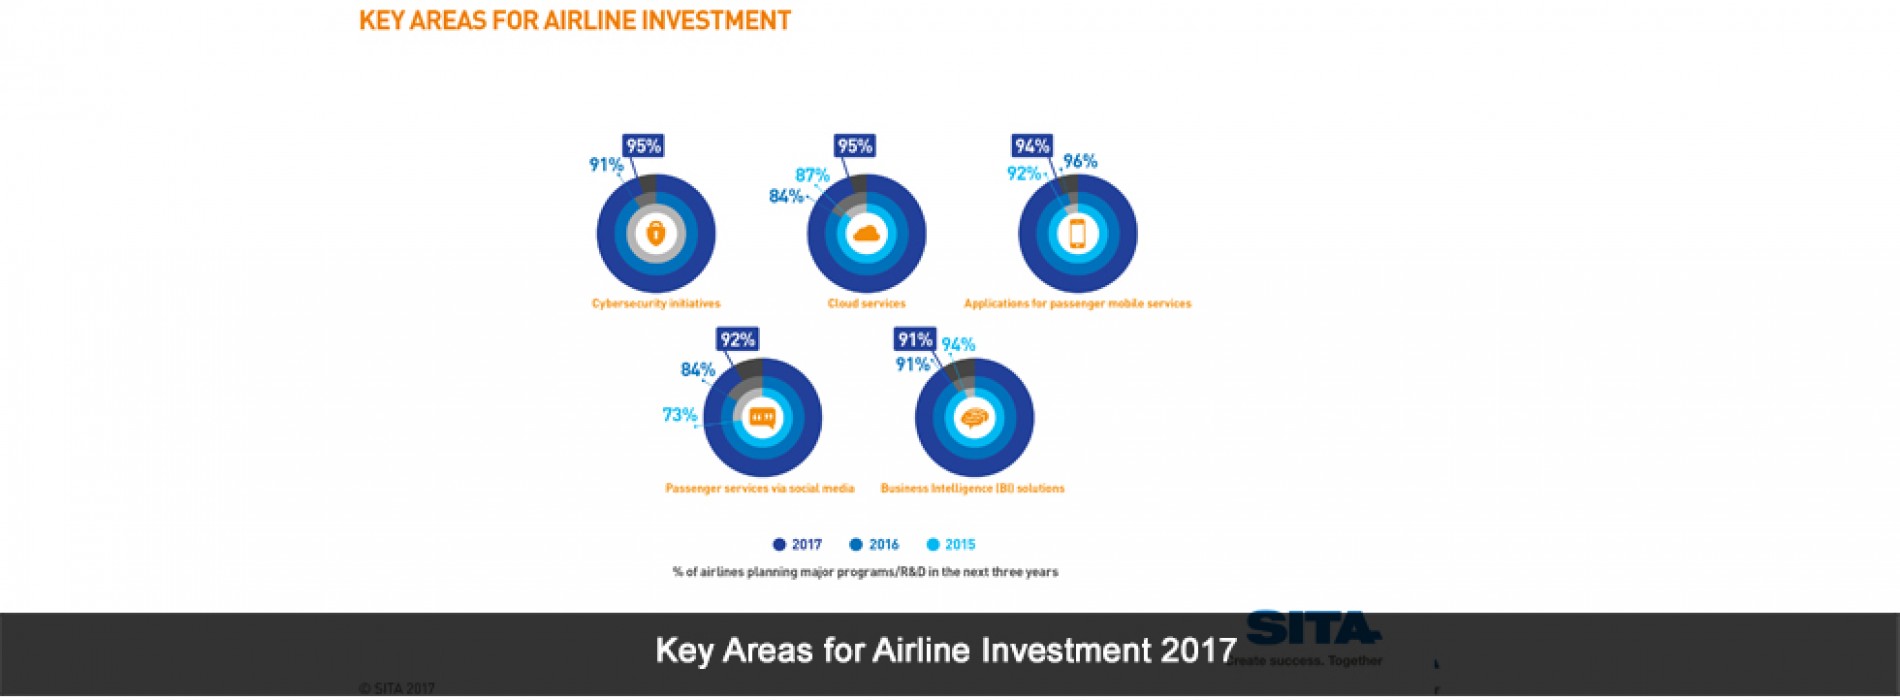 Airlines and Airports to invest US$33 Billion in I.T. this year